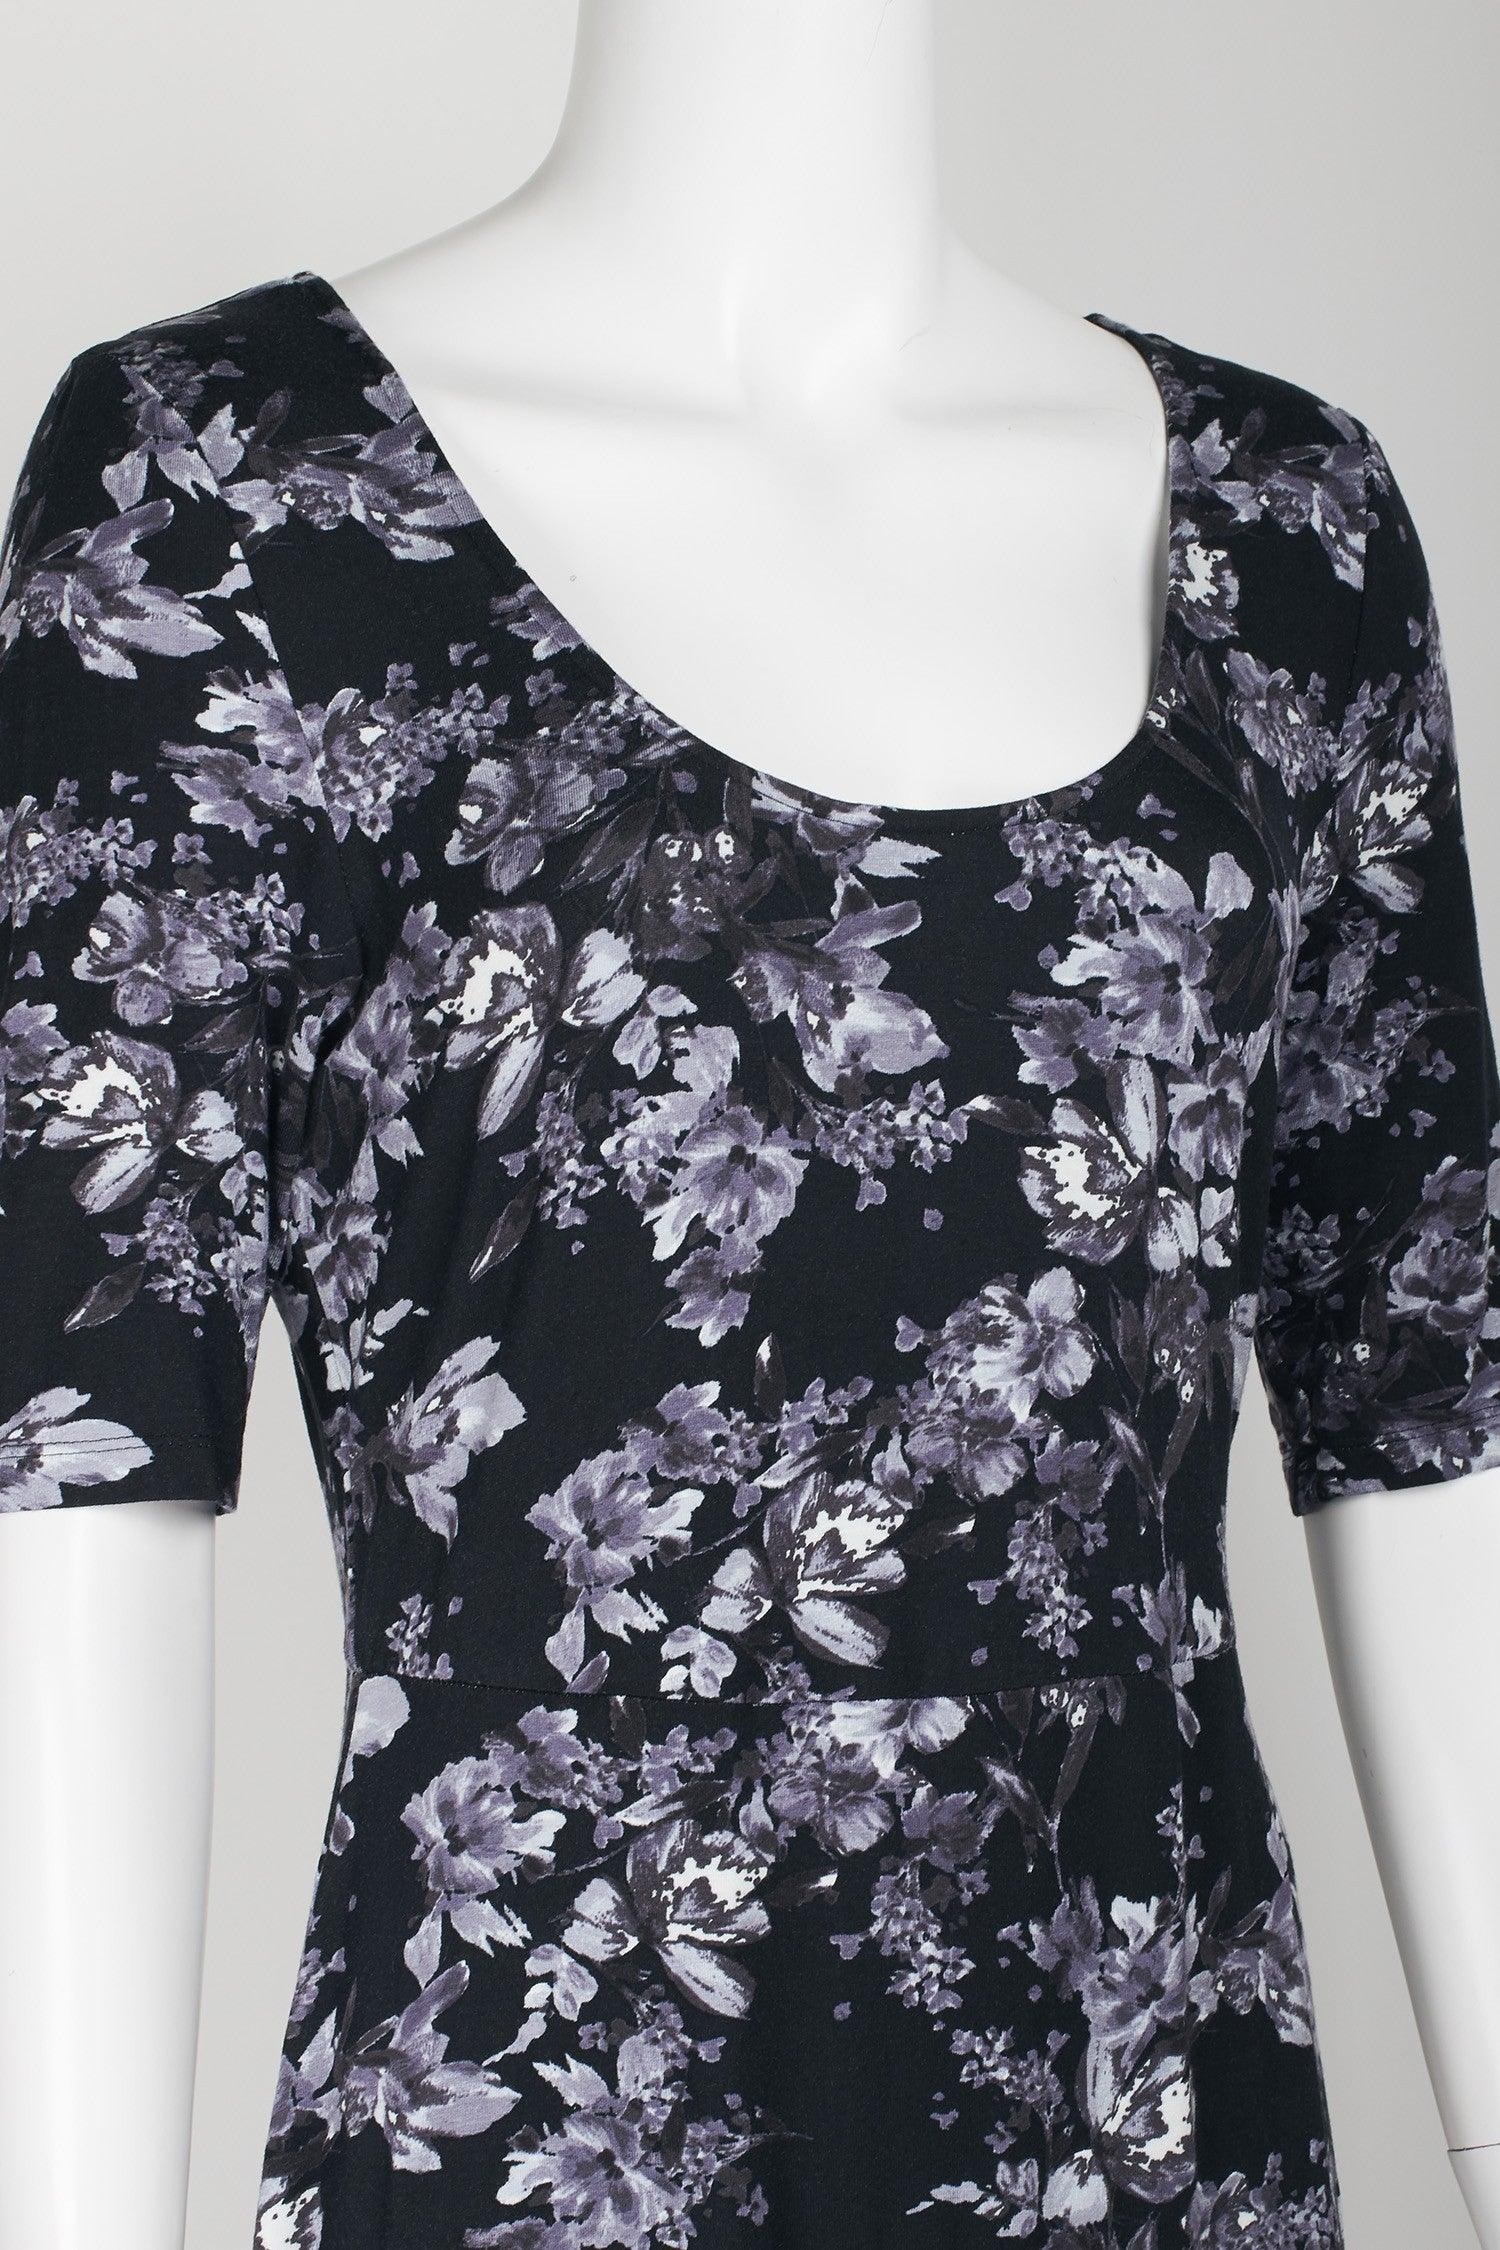 Connected Apparel Short Long Sleeve Floral Dress - The Dress Outlet